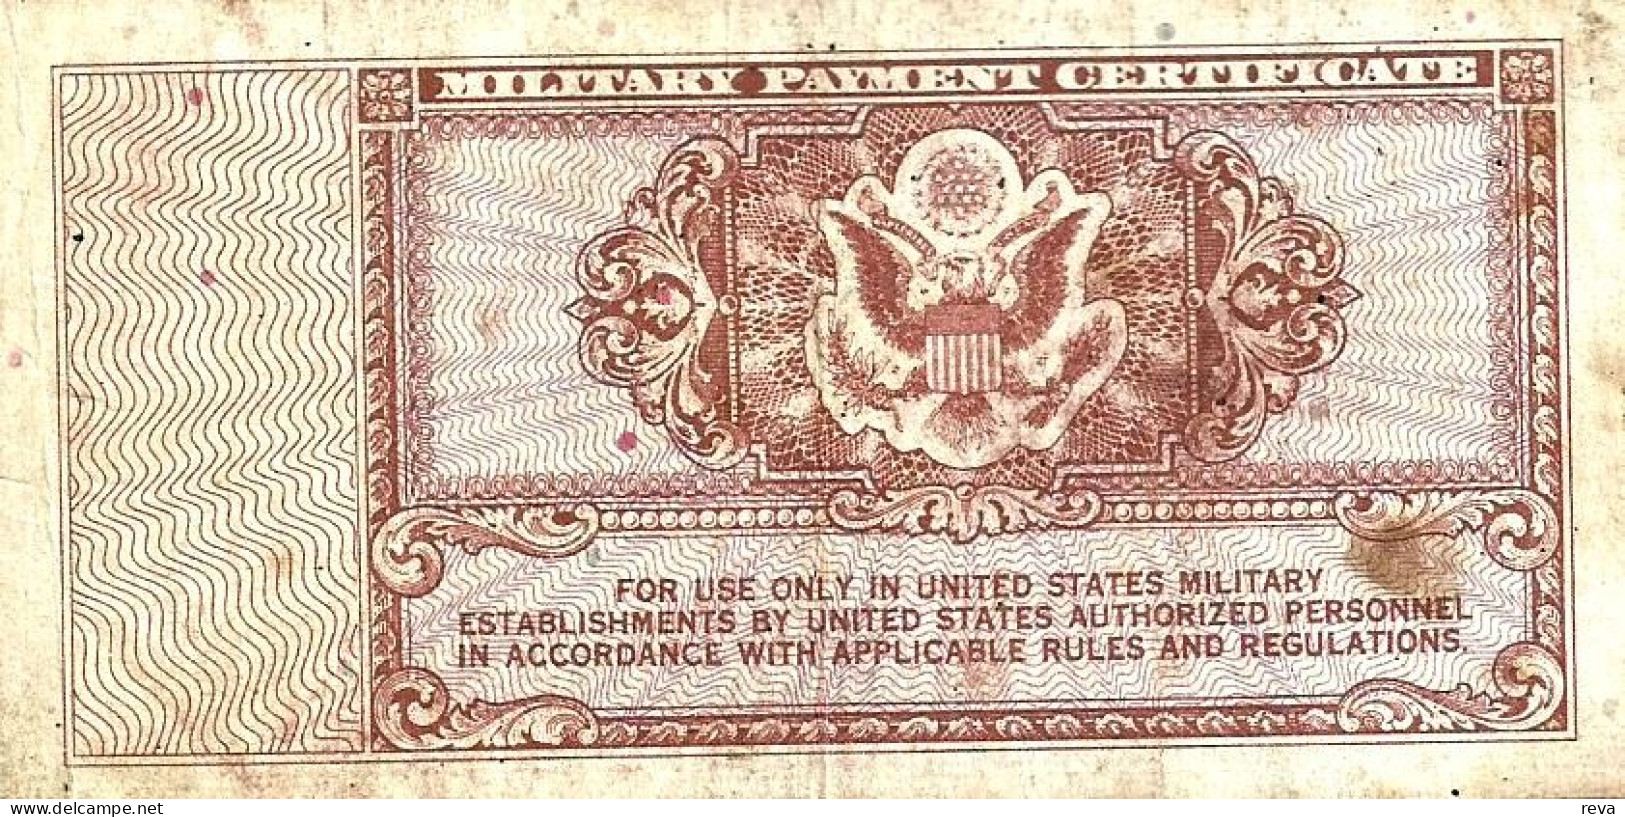 USA UNITED STATES 5 CENTS MILITARY CERTIFICATE BLUE MOTIF SERIES 472 VF ND(1948-51) PM? READ DESCRIPTION CAREFULLY !! - 1948-1951 - Reeksen 472